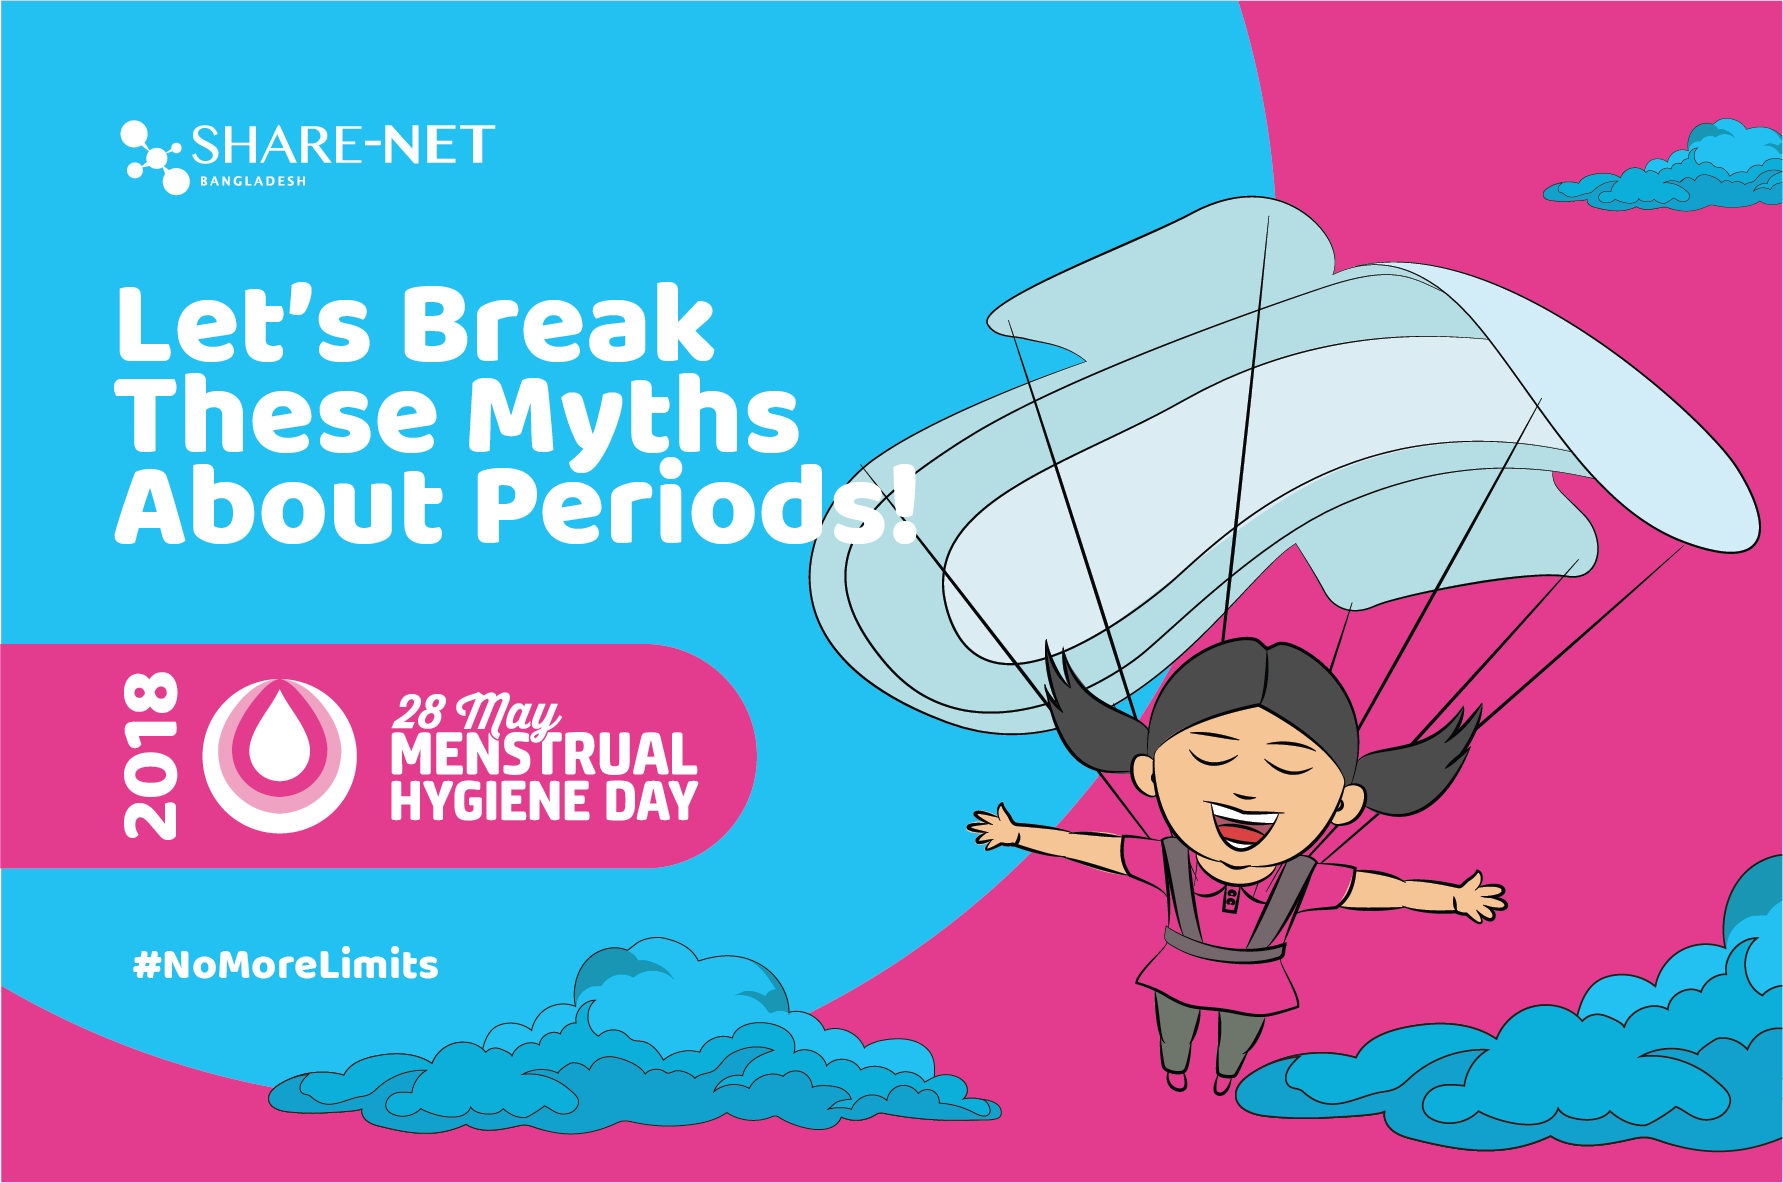 Let's Break These Myths About Periods! - Share-Net Bangladesh